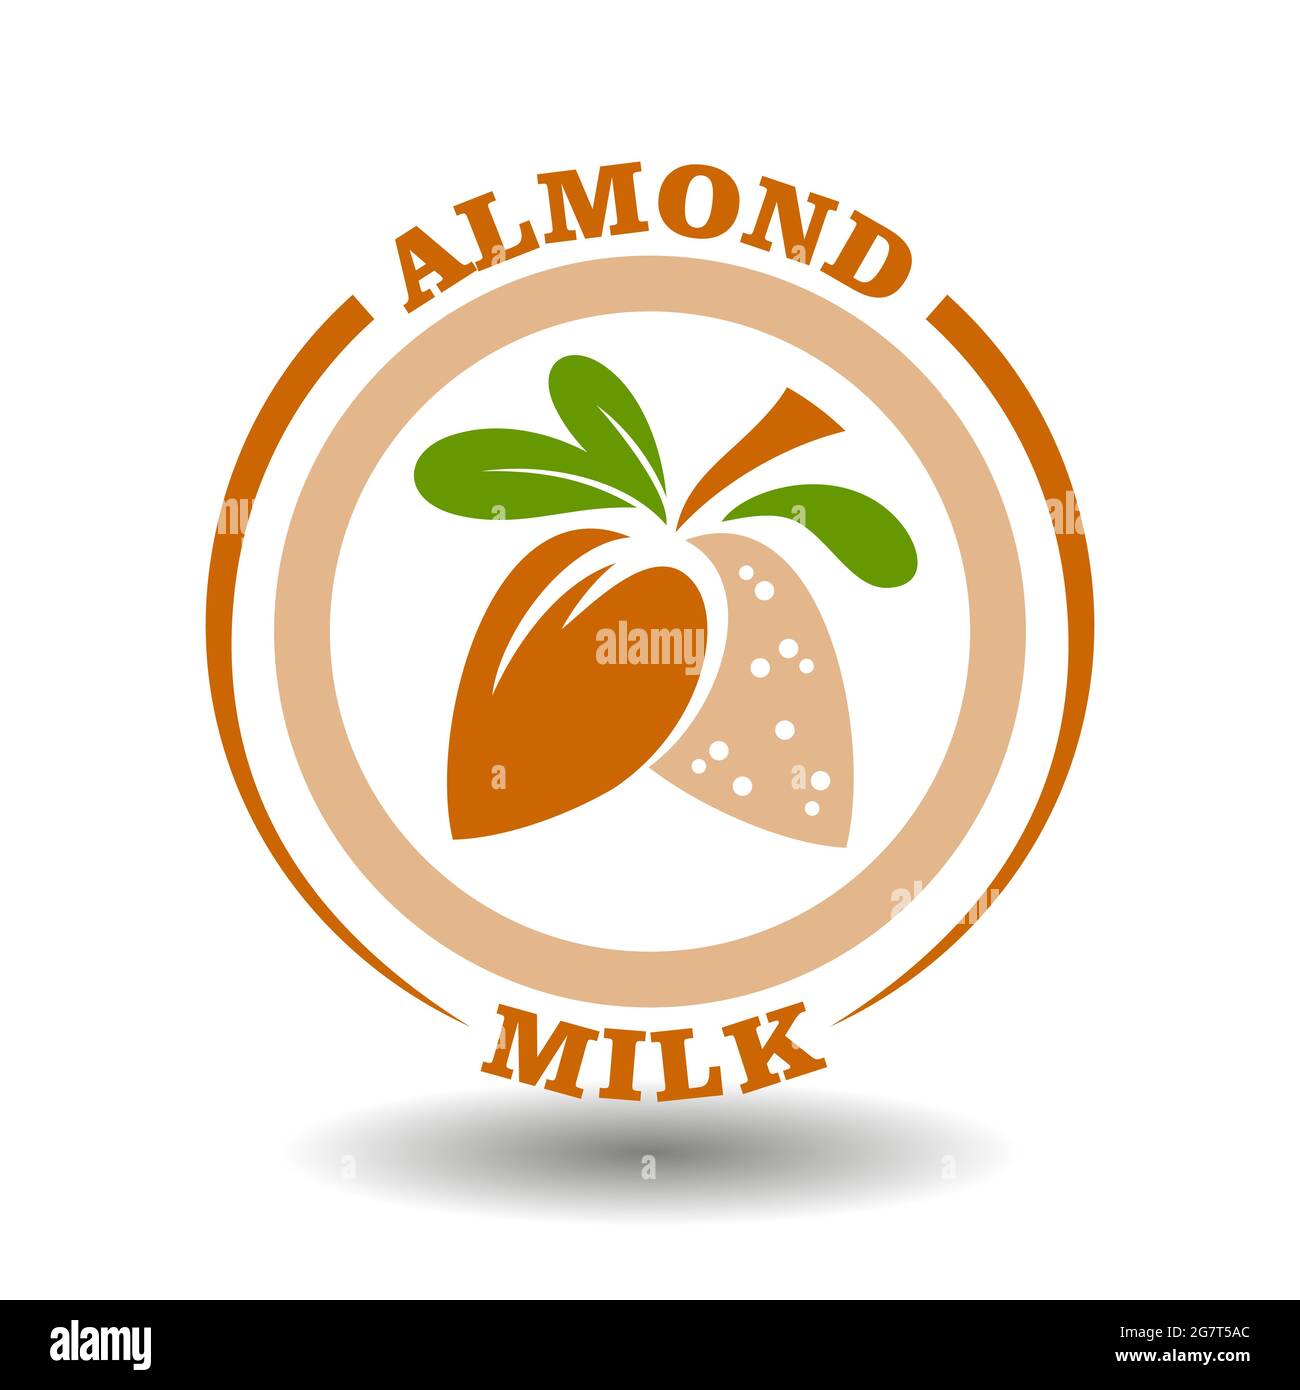 Simple circle logo Almond milk with round half cut nut shells icon and green leaves symbol for labeling product contain natural organic sweet almond o Stock Vector